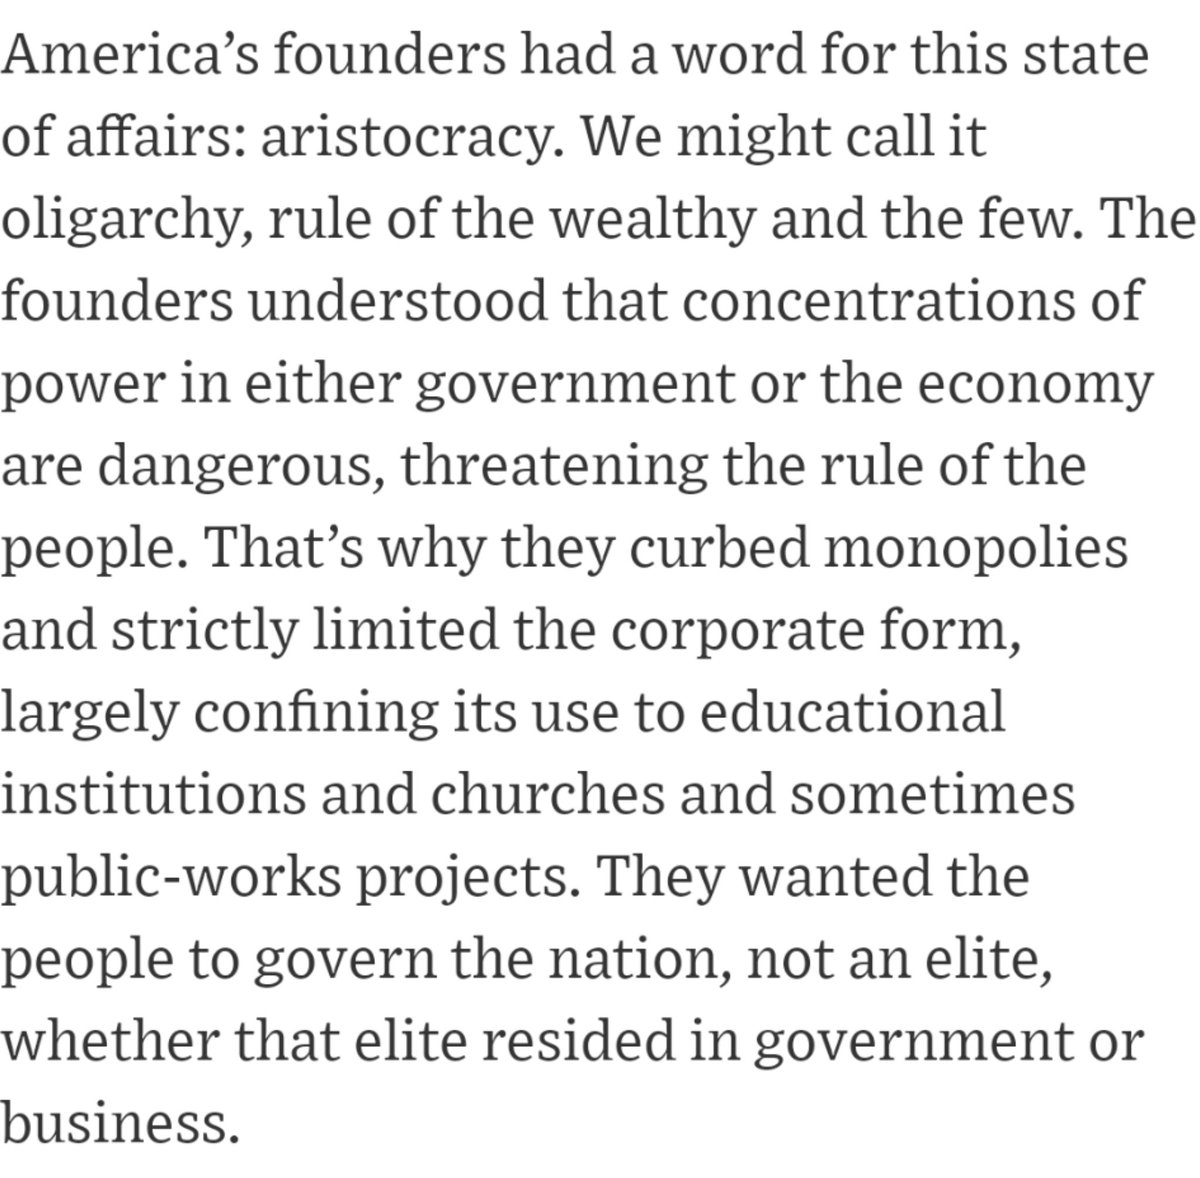 5/ It's pretty late in the damn day for the GOP to be talking about the limits of colonial corporate charters. Ahem, Citizens United?And actually, all the Founders opposed was literal, born-to-rule, fifth duke of wherever aristocracy. By modern standards, they were "an elite."